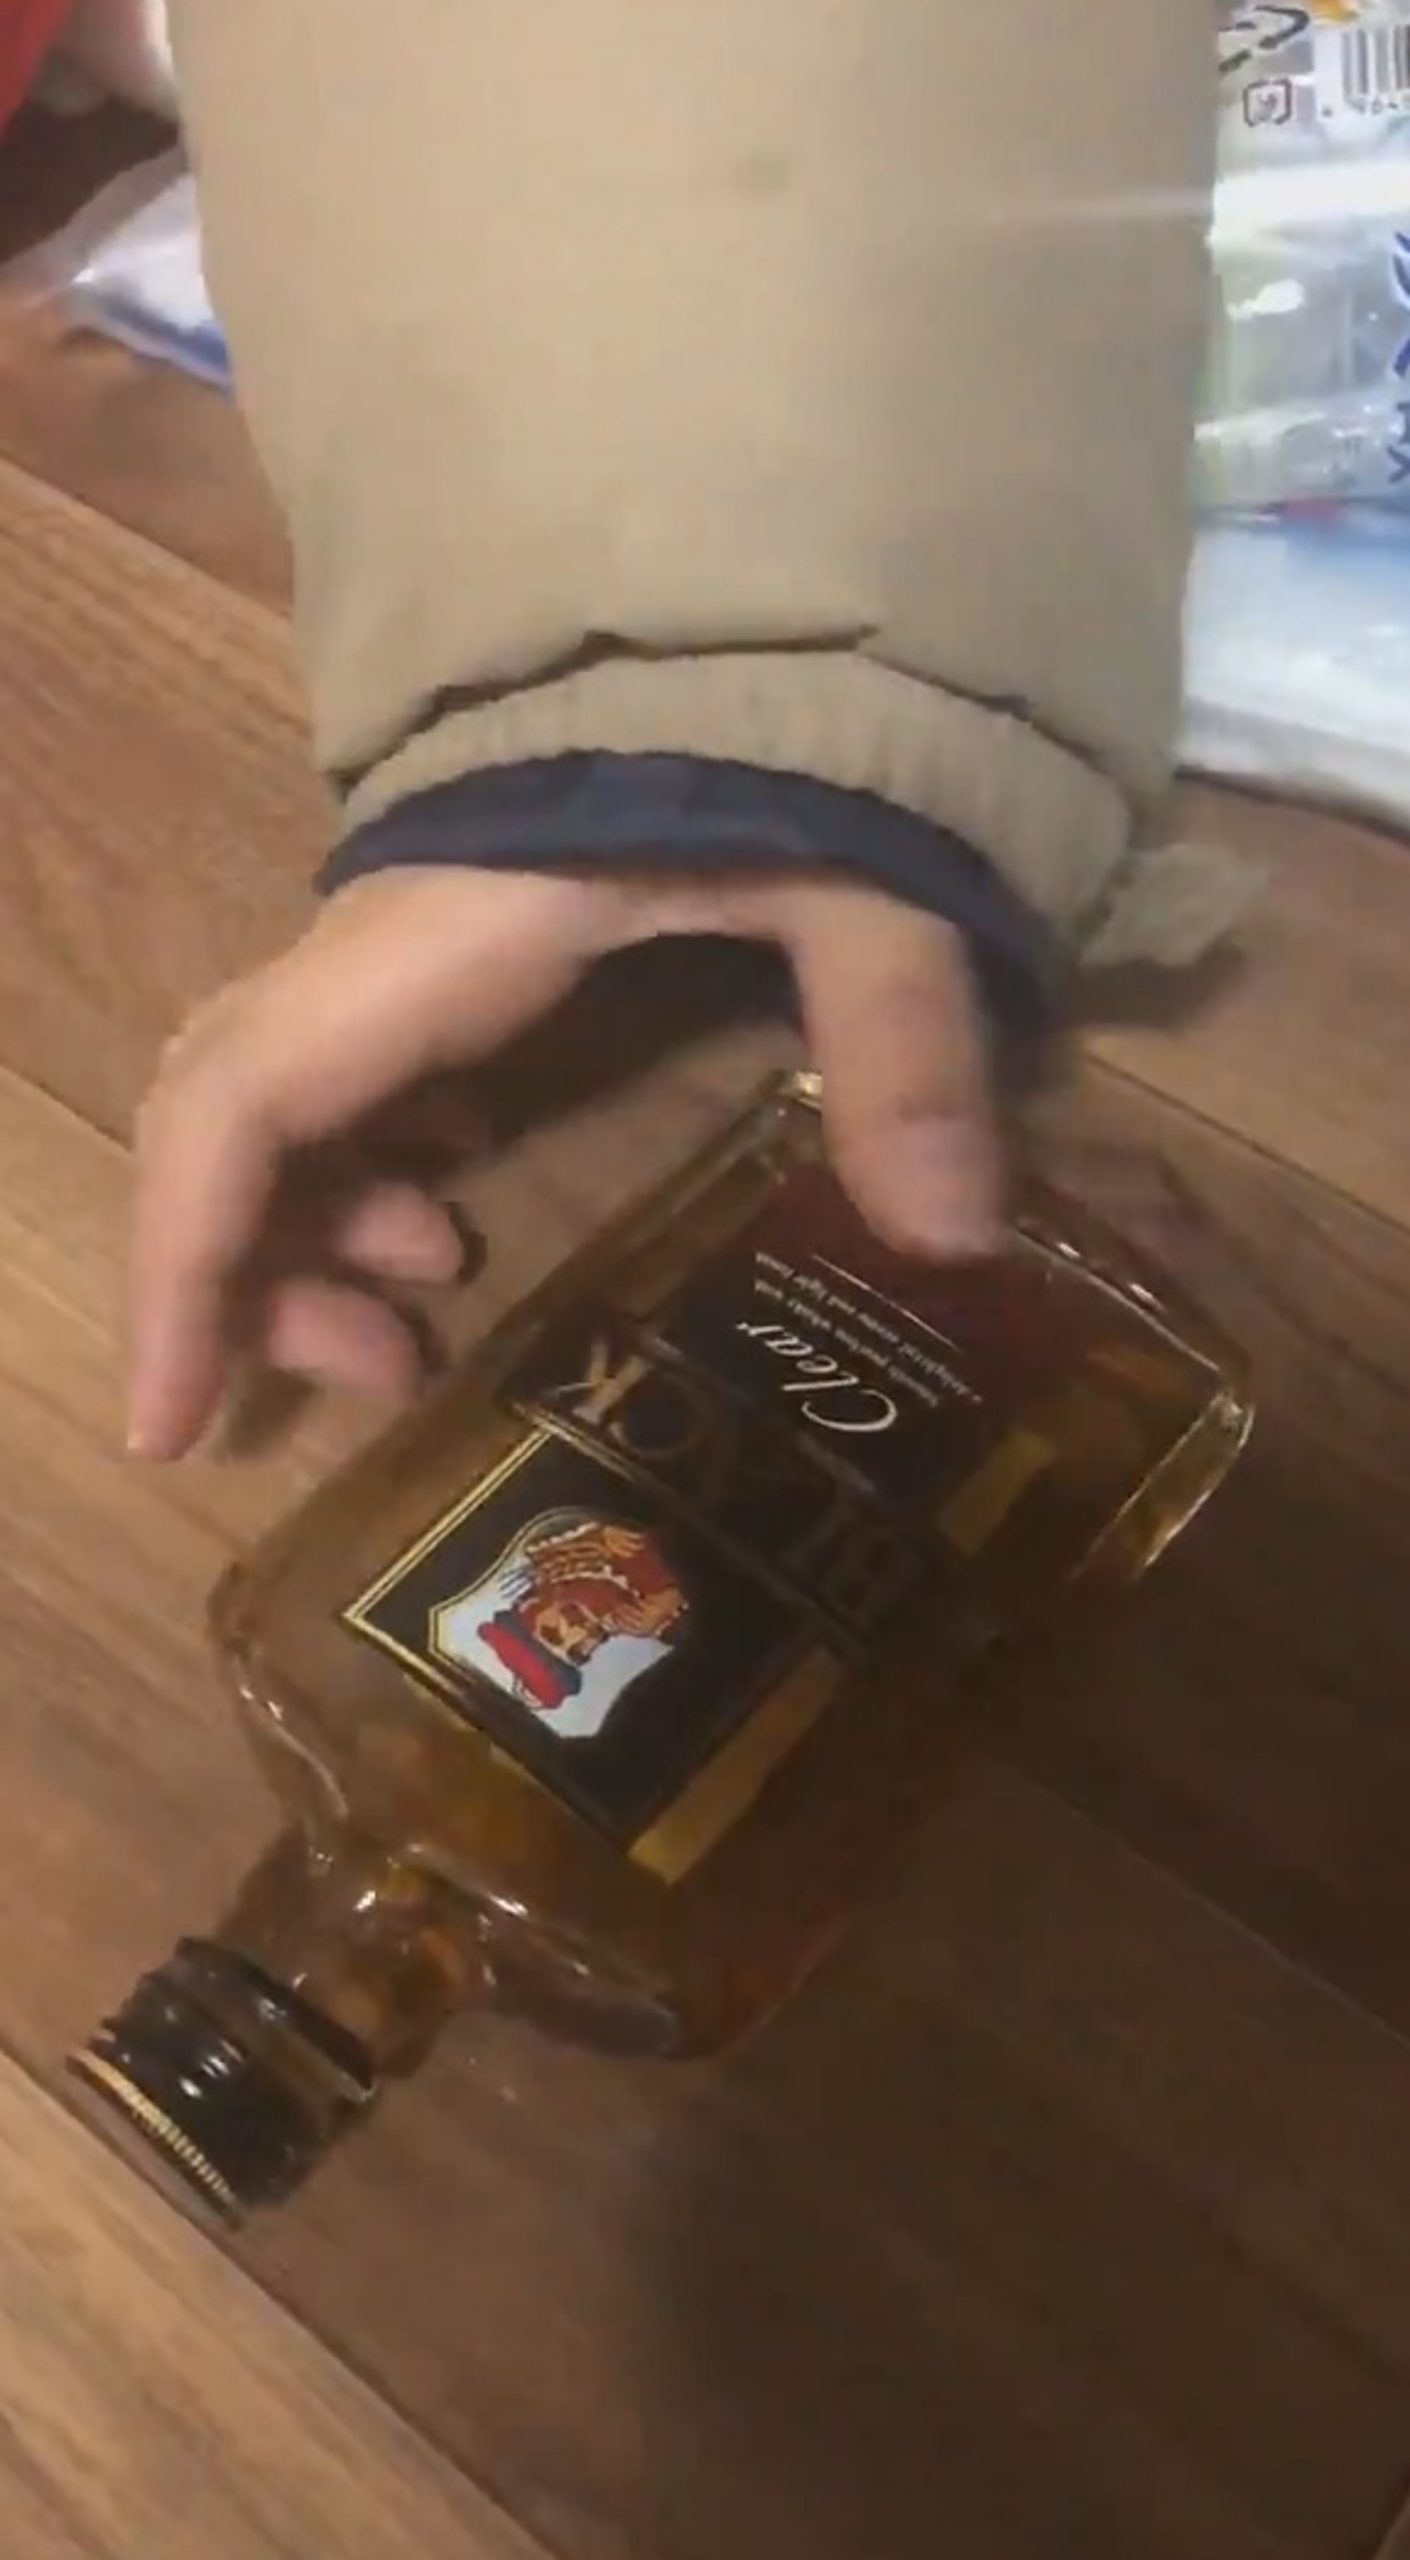 Read more about the article Viral: Whisky Bottle Makes Comical Squeak When Toppled